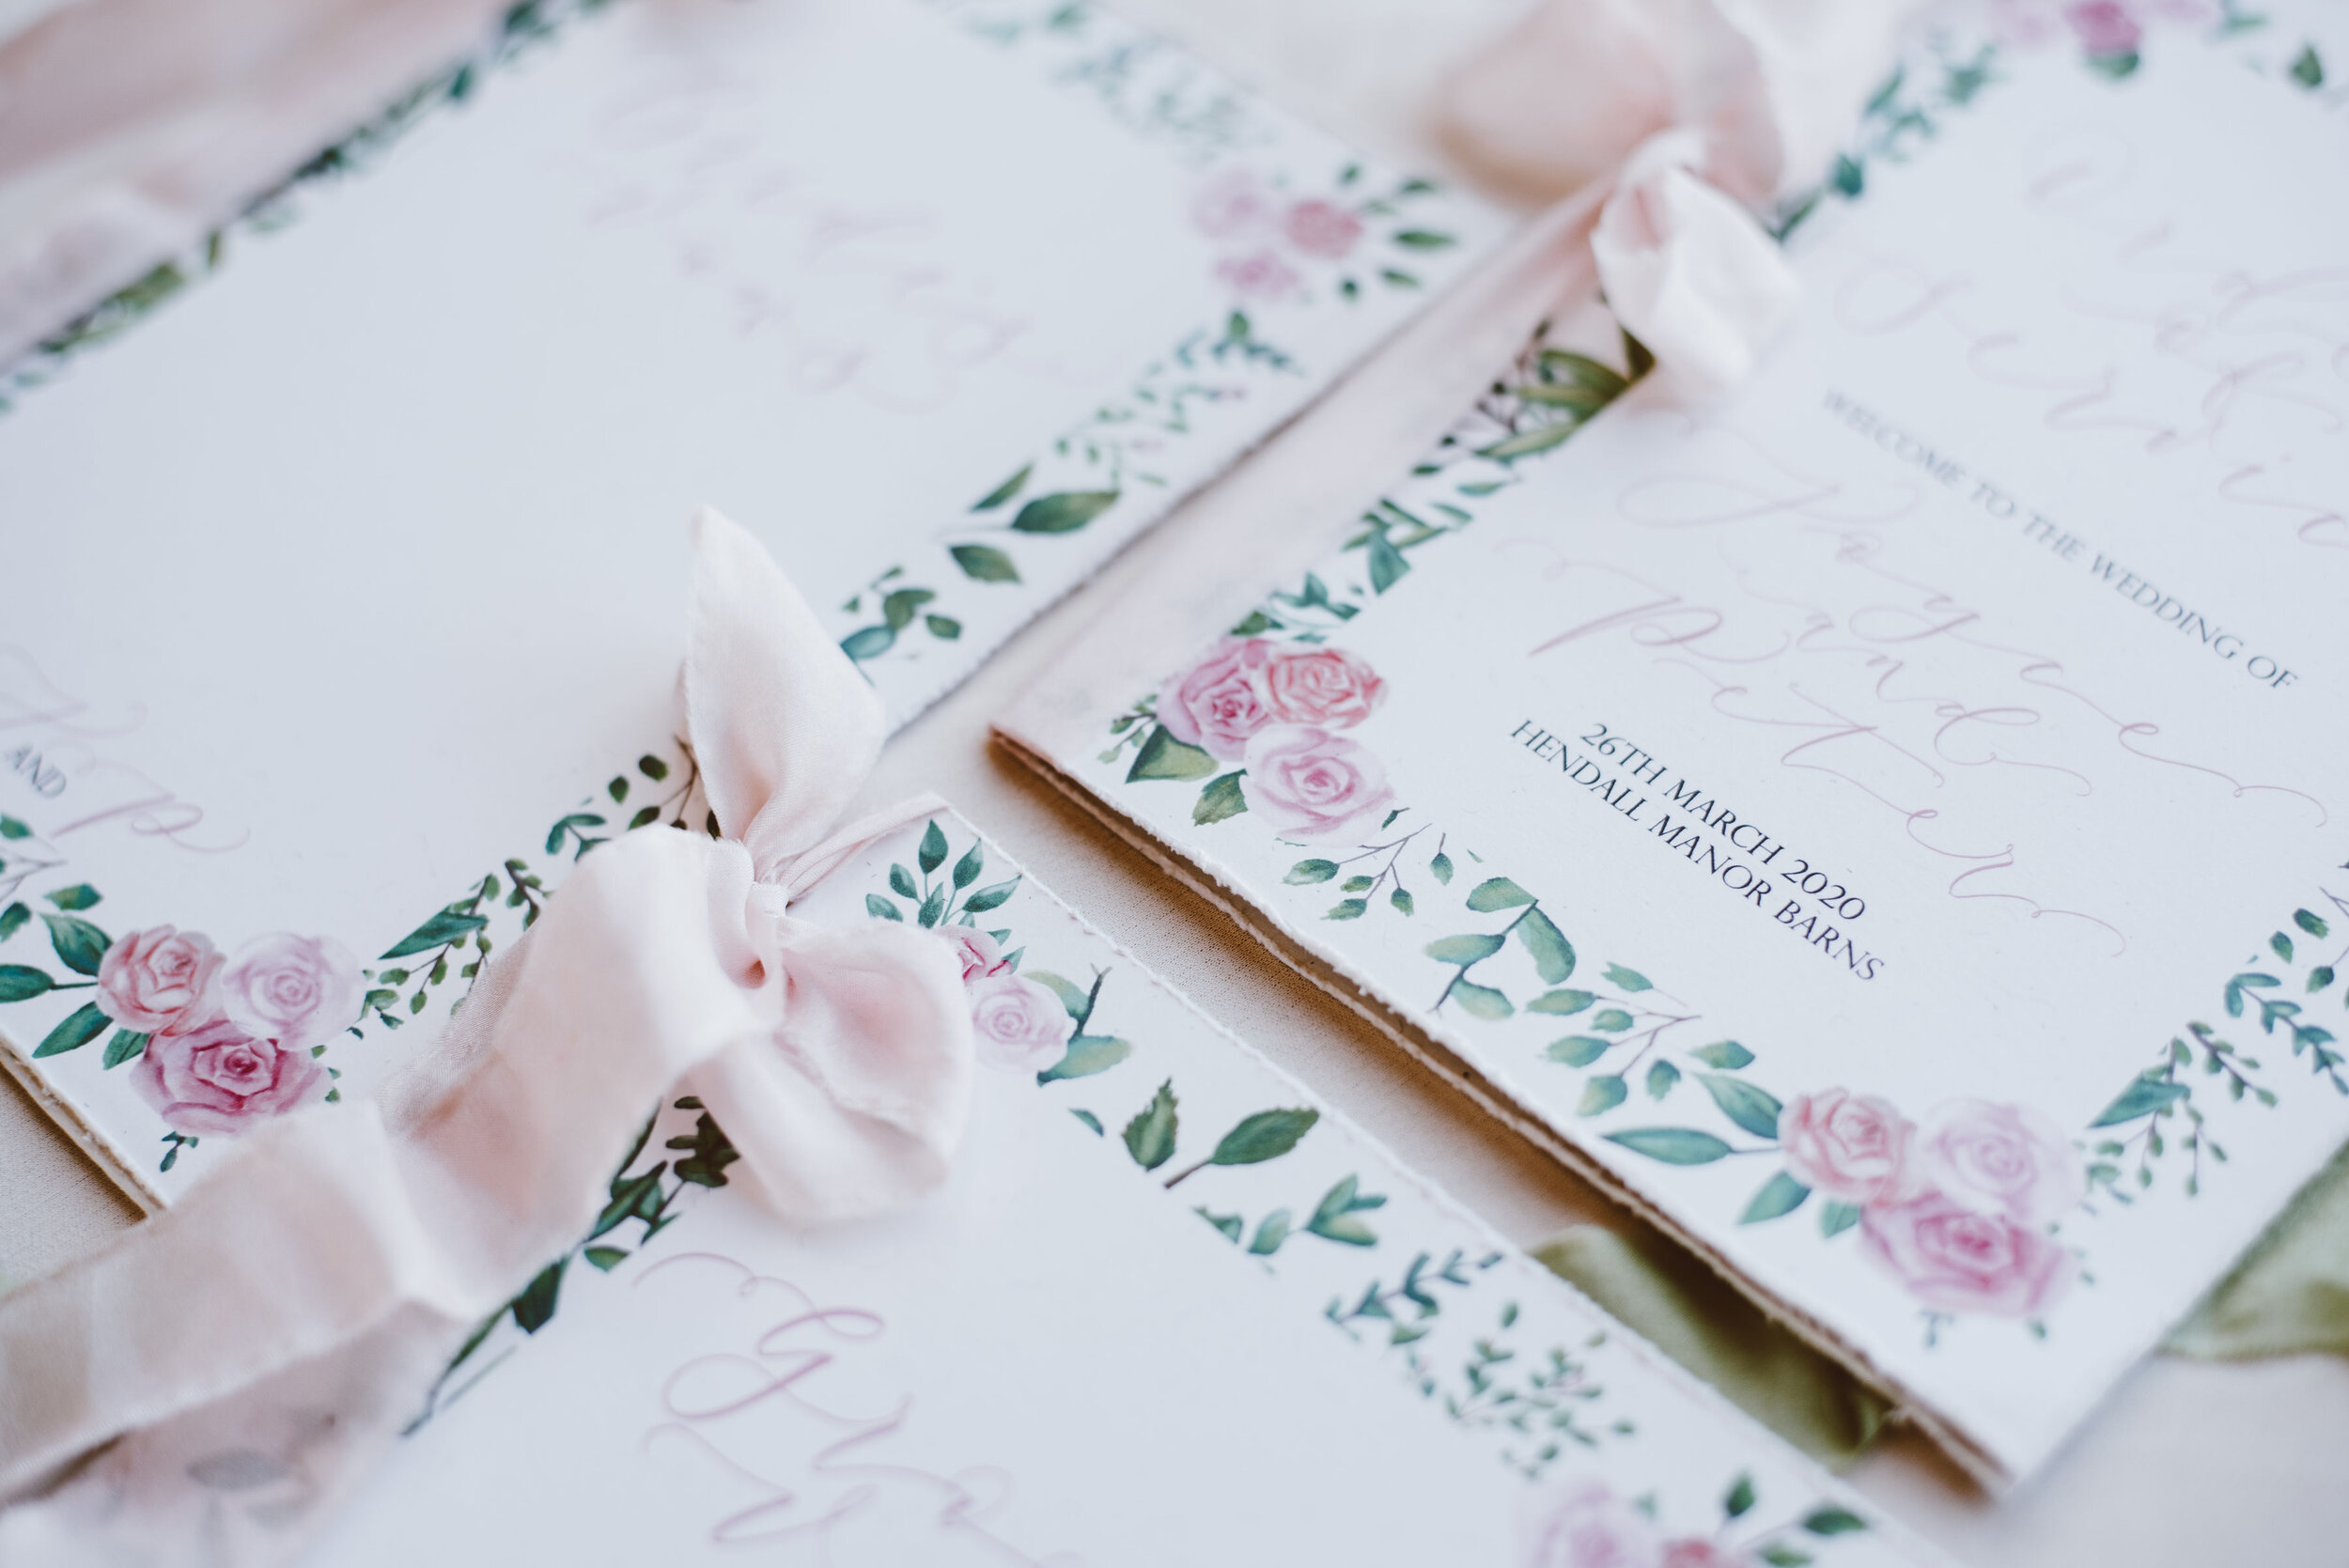 Luxury recycled floral wedding invites with pink roses and greenery and hand-lettered calligraphy by The Amyverse